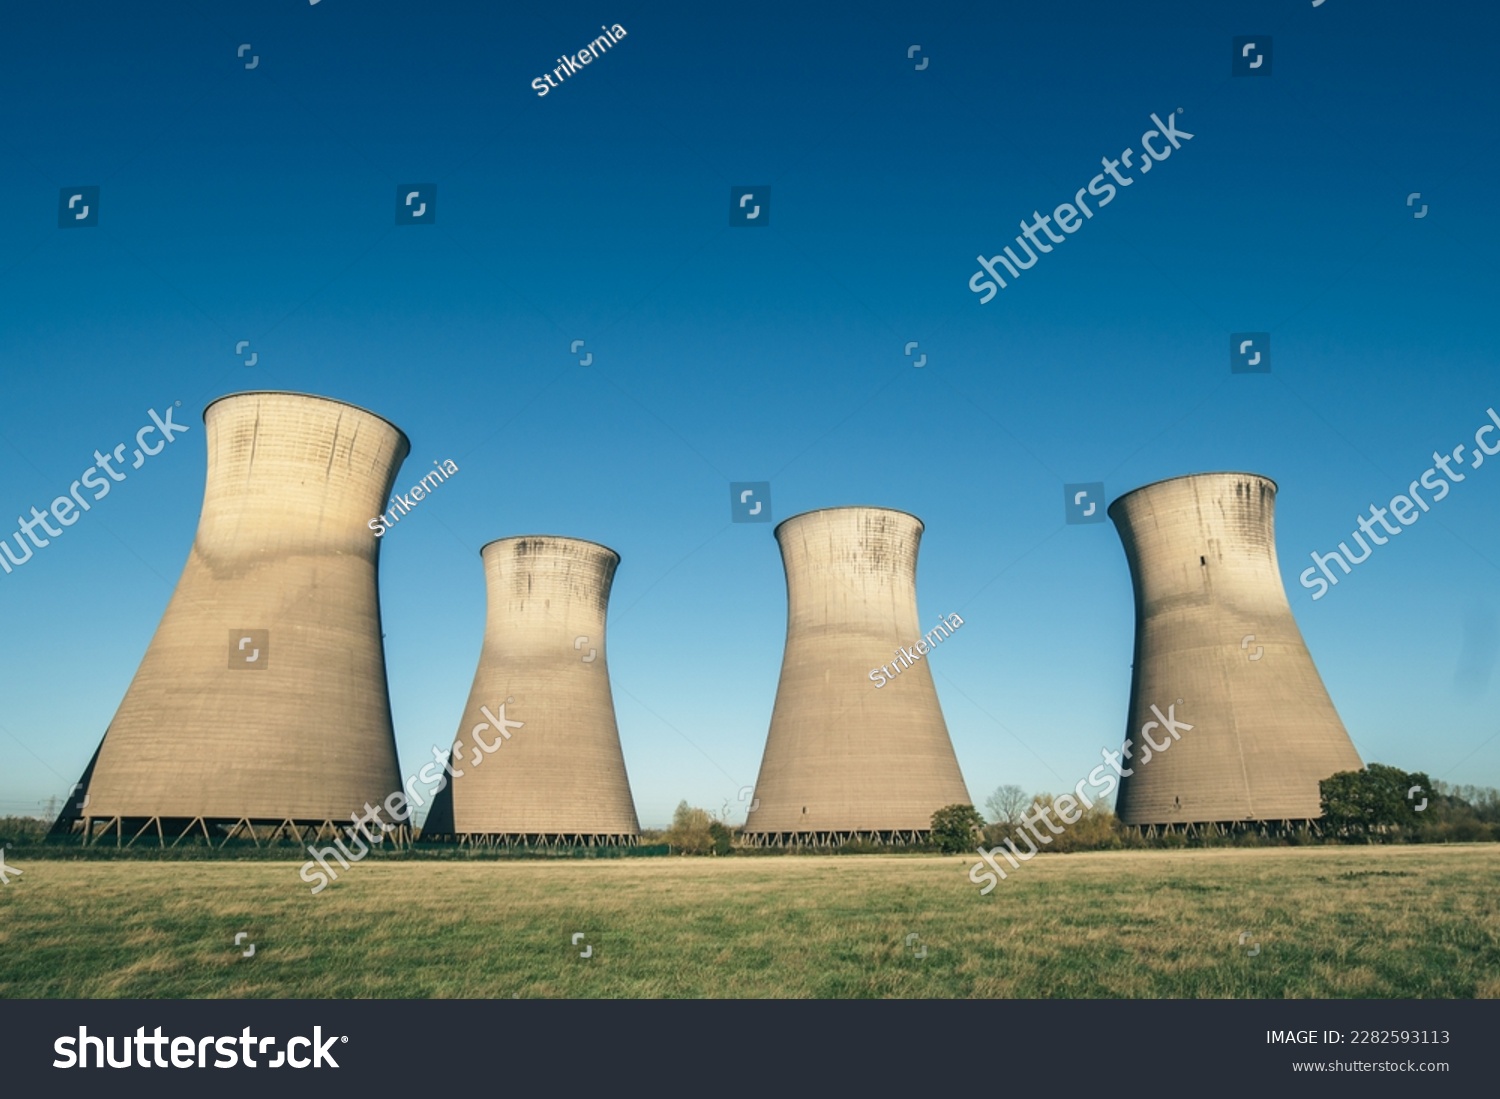 Cooling tower of nuclear power plant.   abandoned power plant.   #2282593113